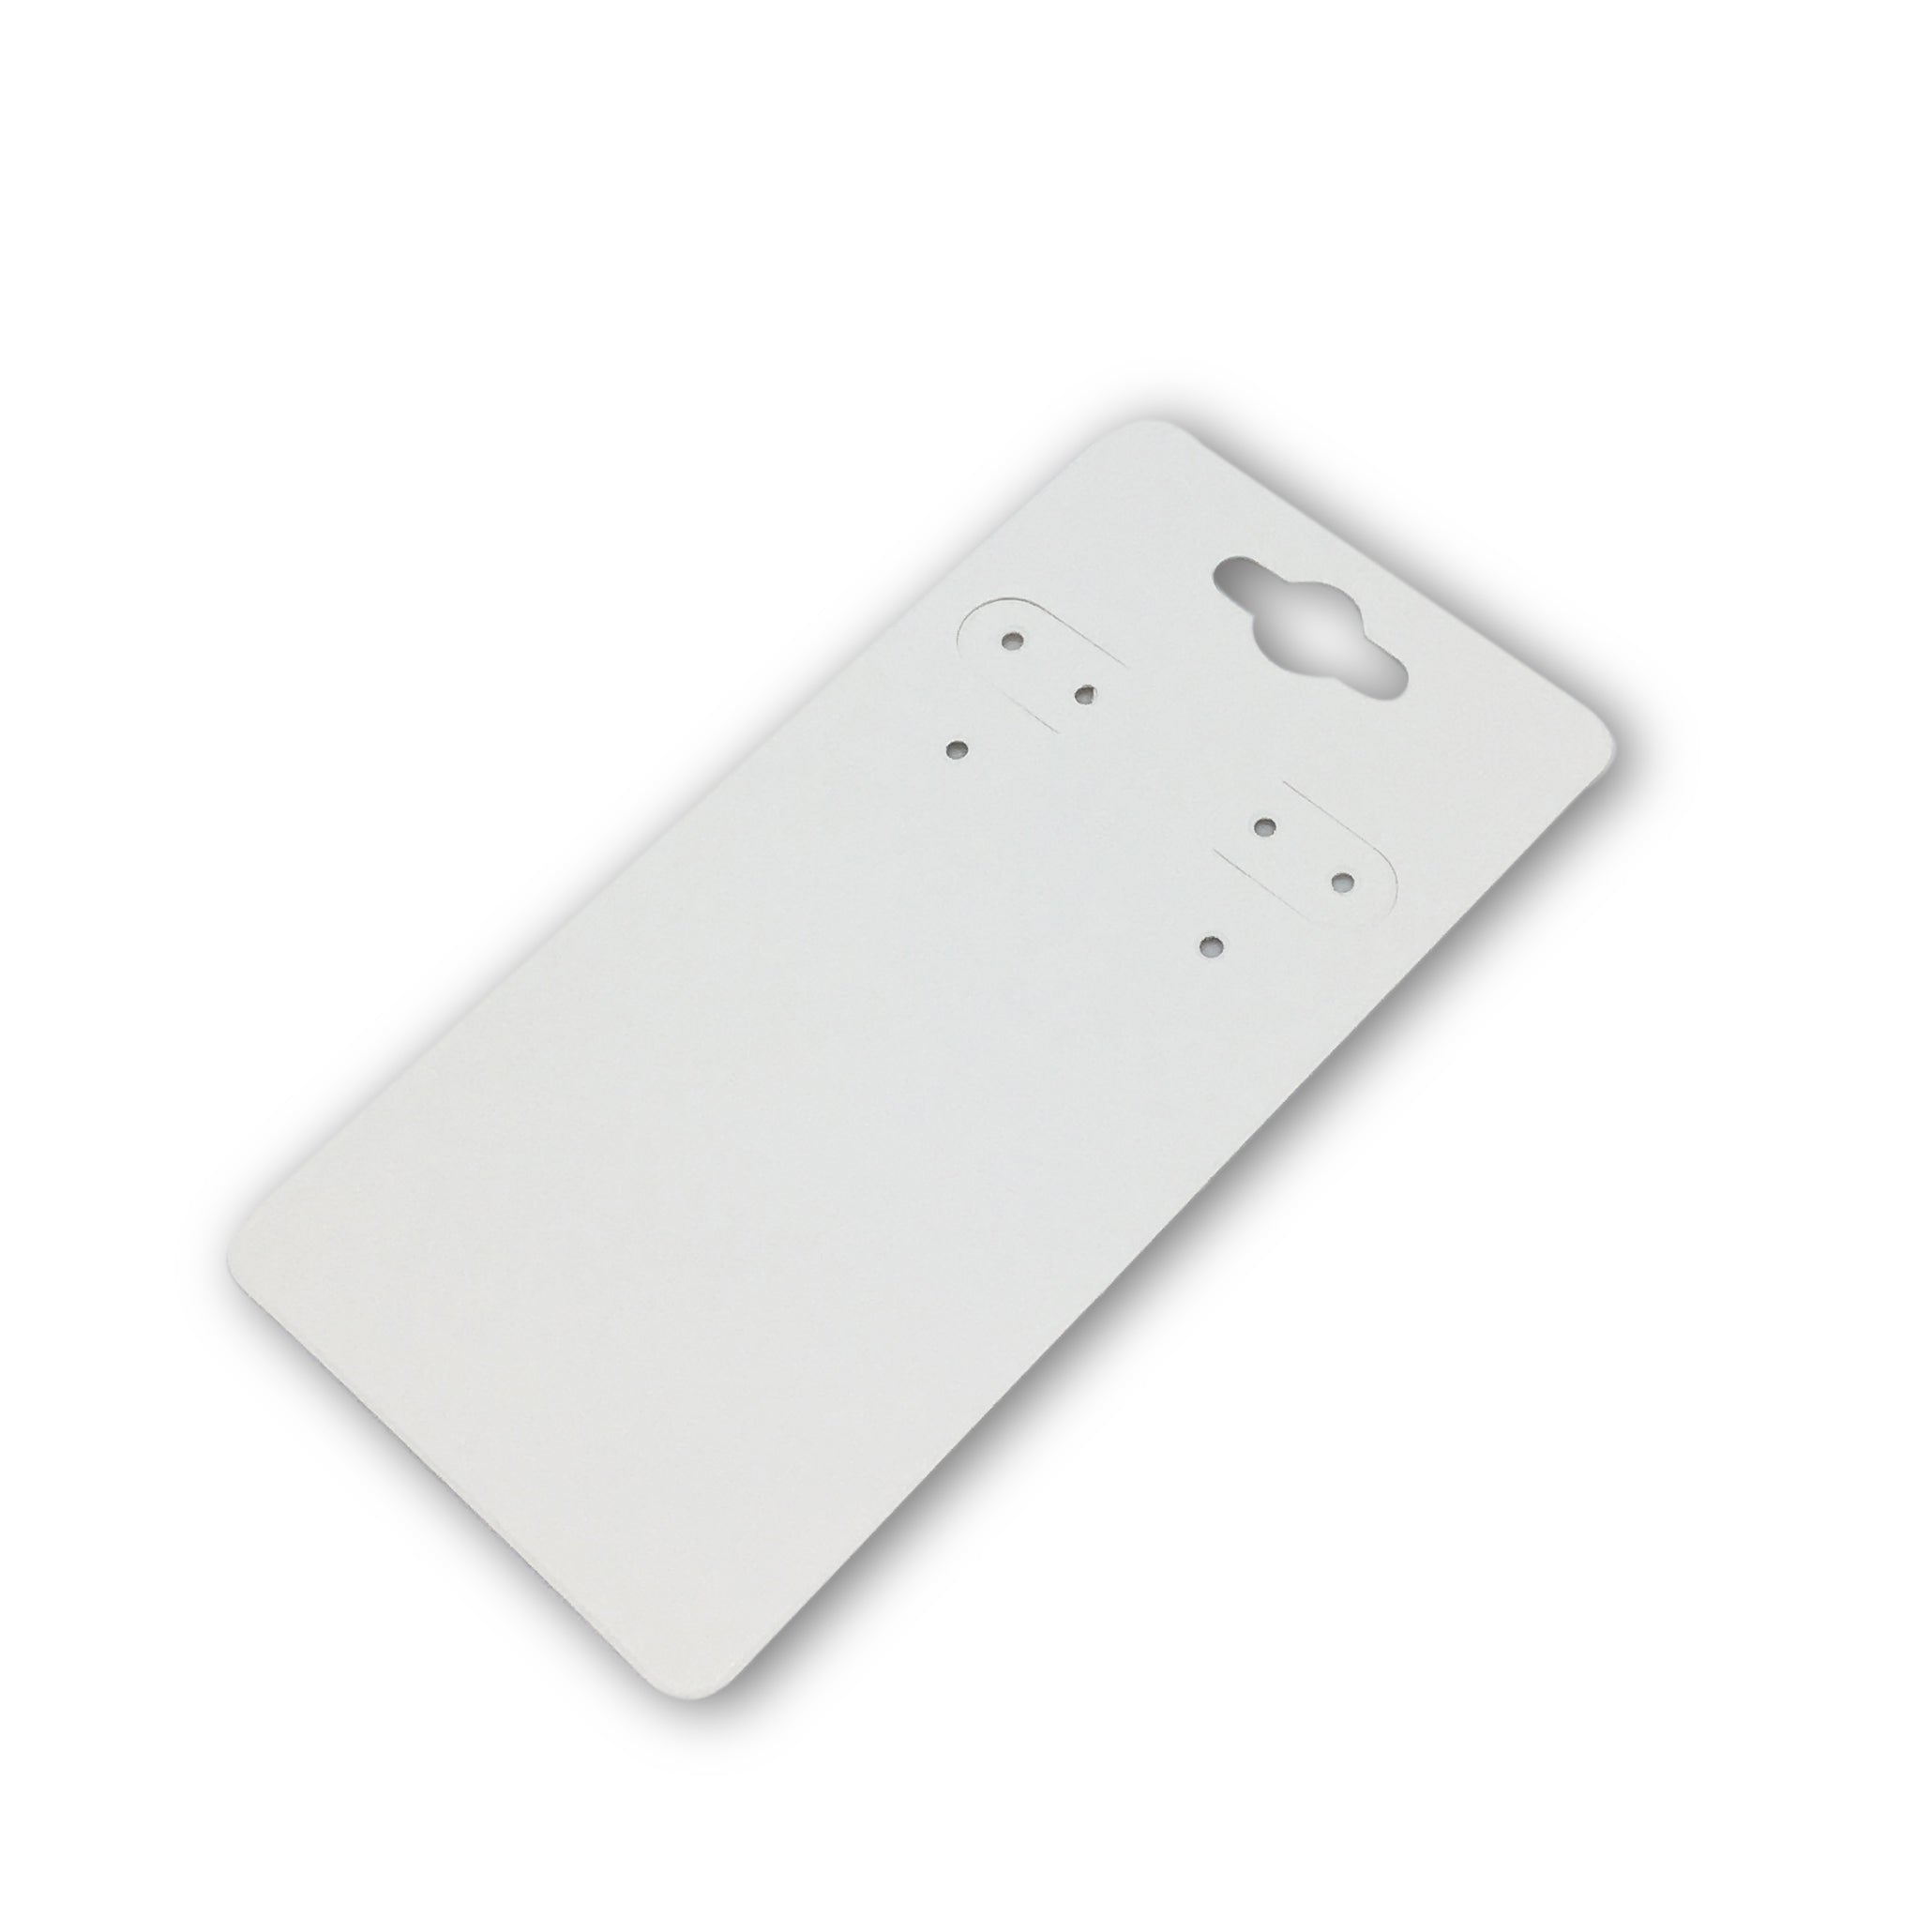  G2PLUS 100PCS White Necklace Display Cards,2.16'' x